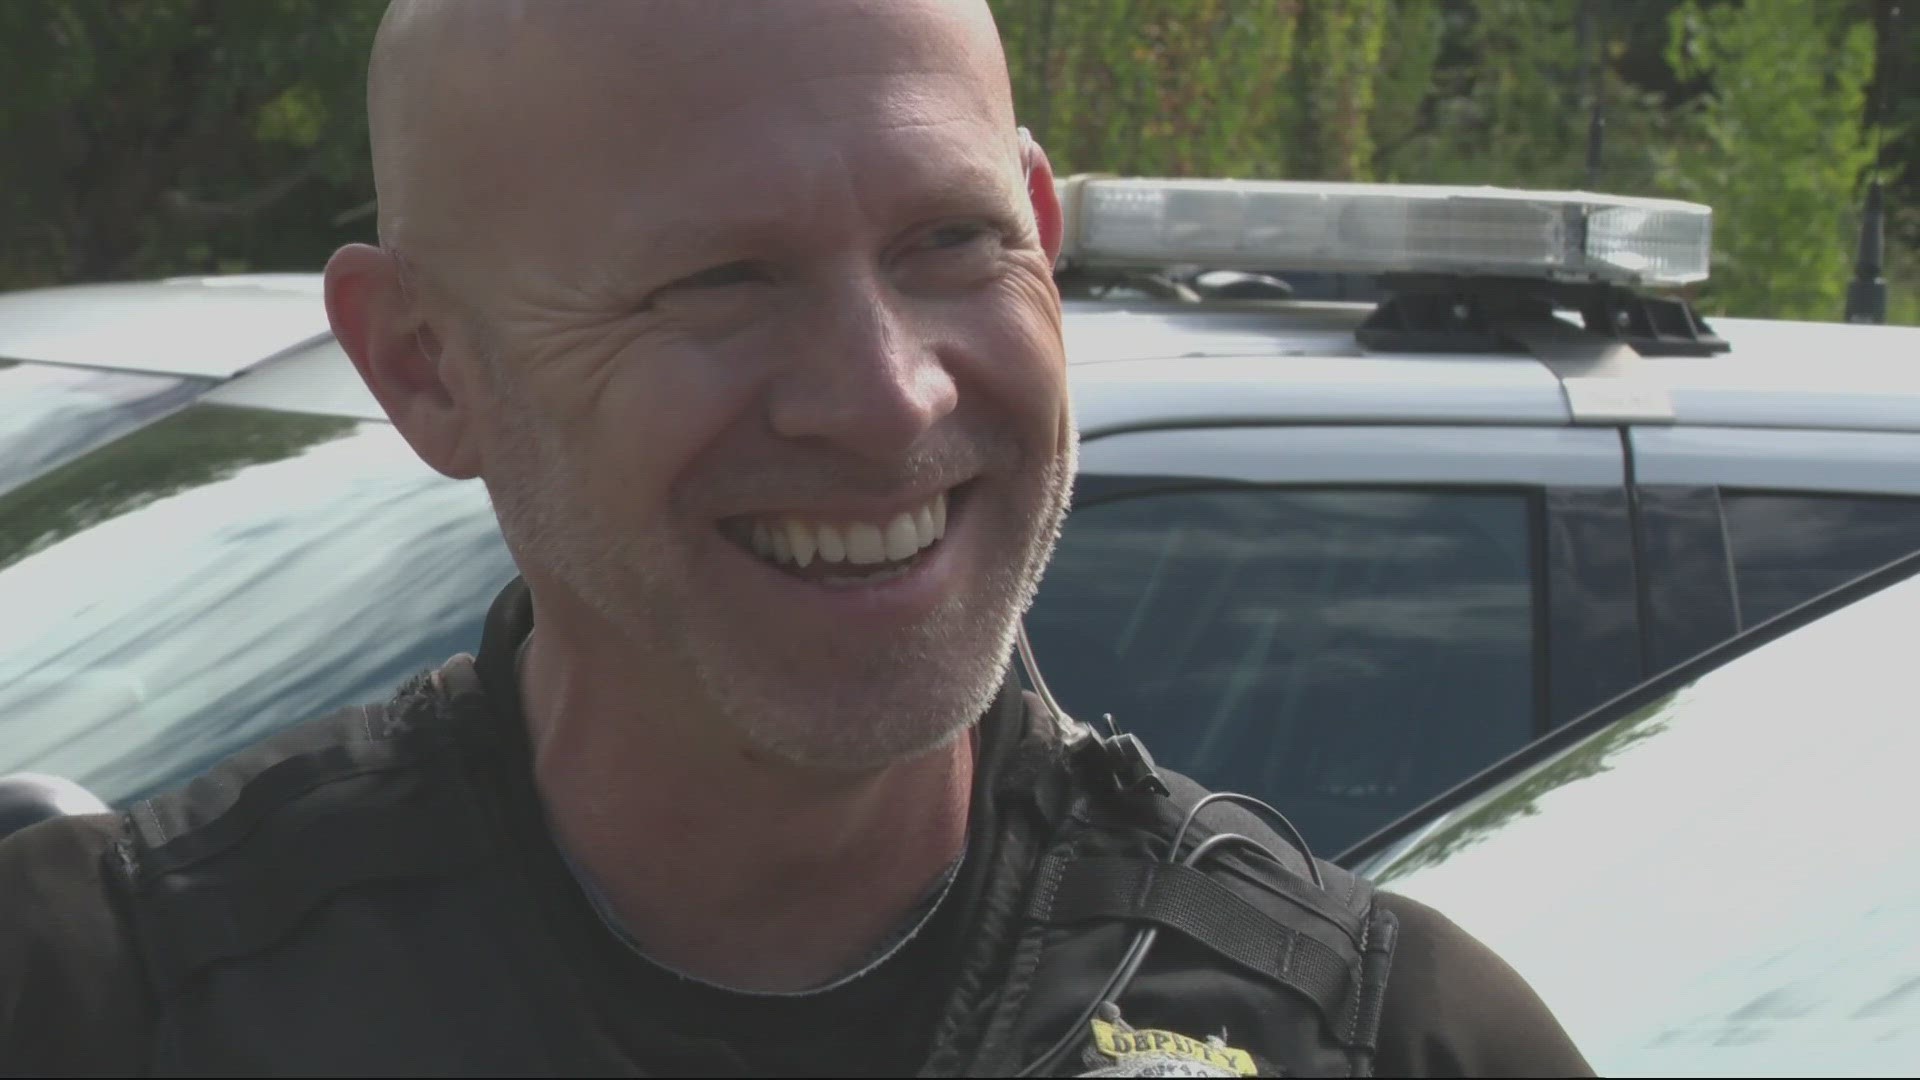 Deputy Brian Rogers did much more than just his duty after responding to a theft call of a stolen bicycle belong to a special needs victim.